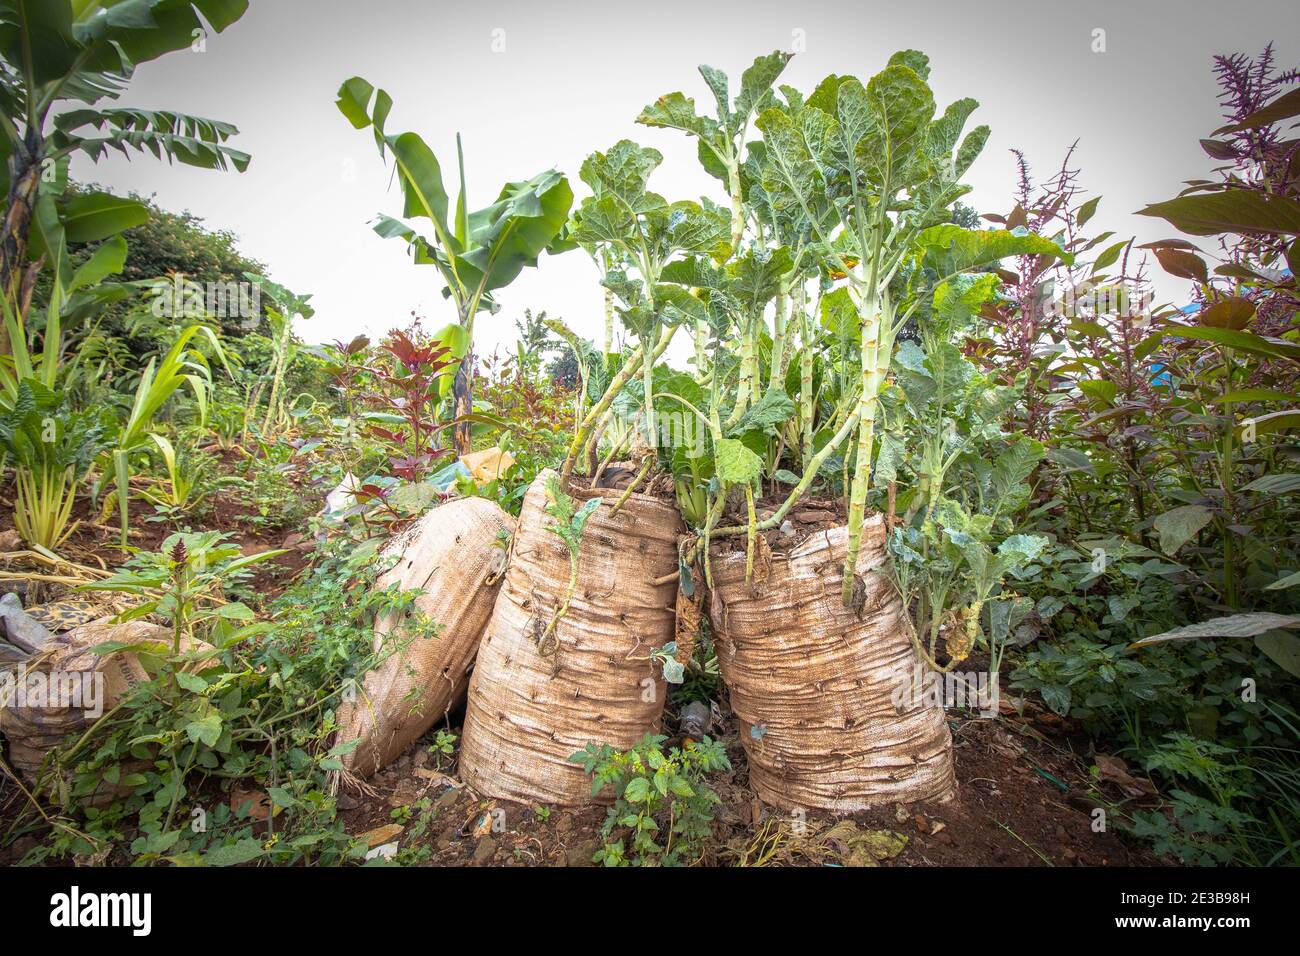 Polypropylene sacks is used by local small scale farmers to grows  vegetables in Kibera Slums.In Africa's largest and slowly developing Kibera  Slums, well known for its highest growth in population and the